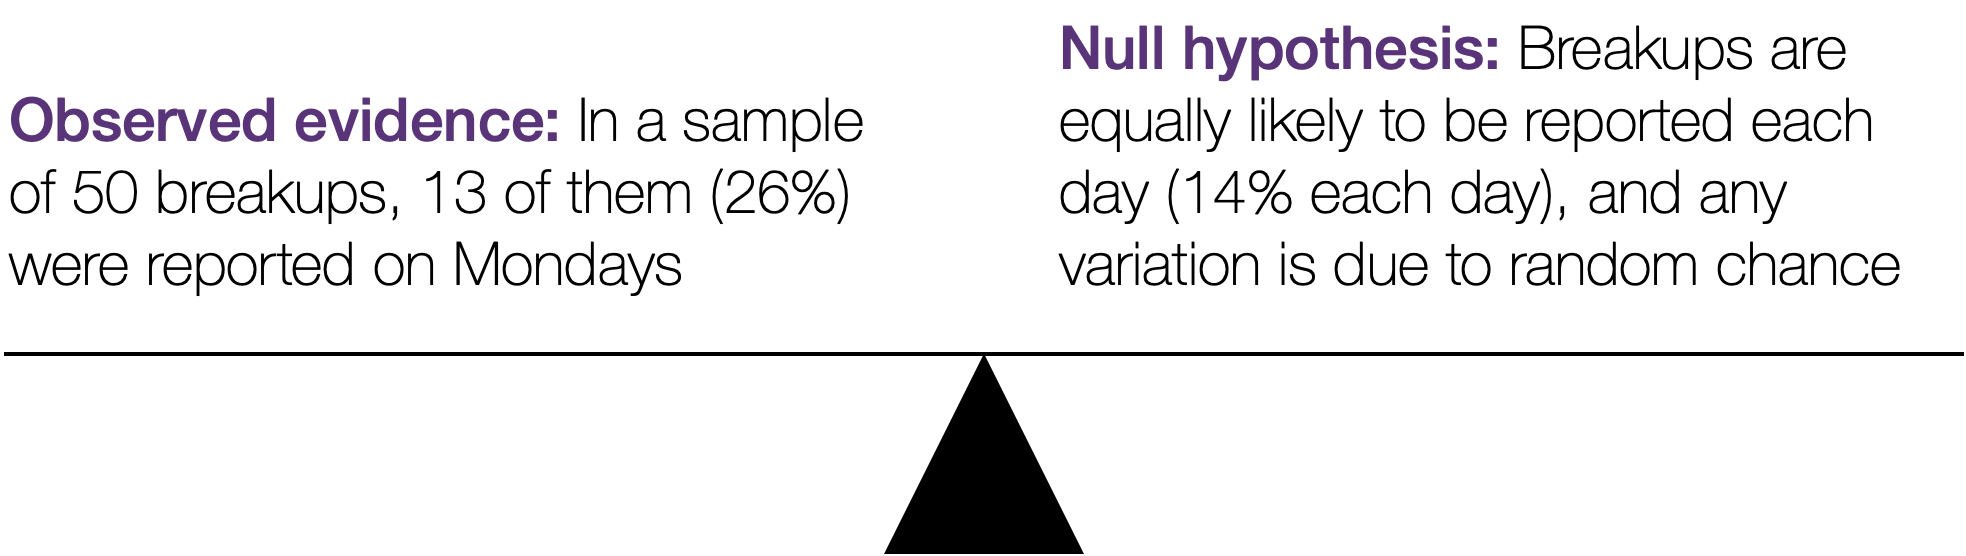 Statistical hypothesis testing involves comparing the observed evidence to a null hypothesis.